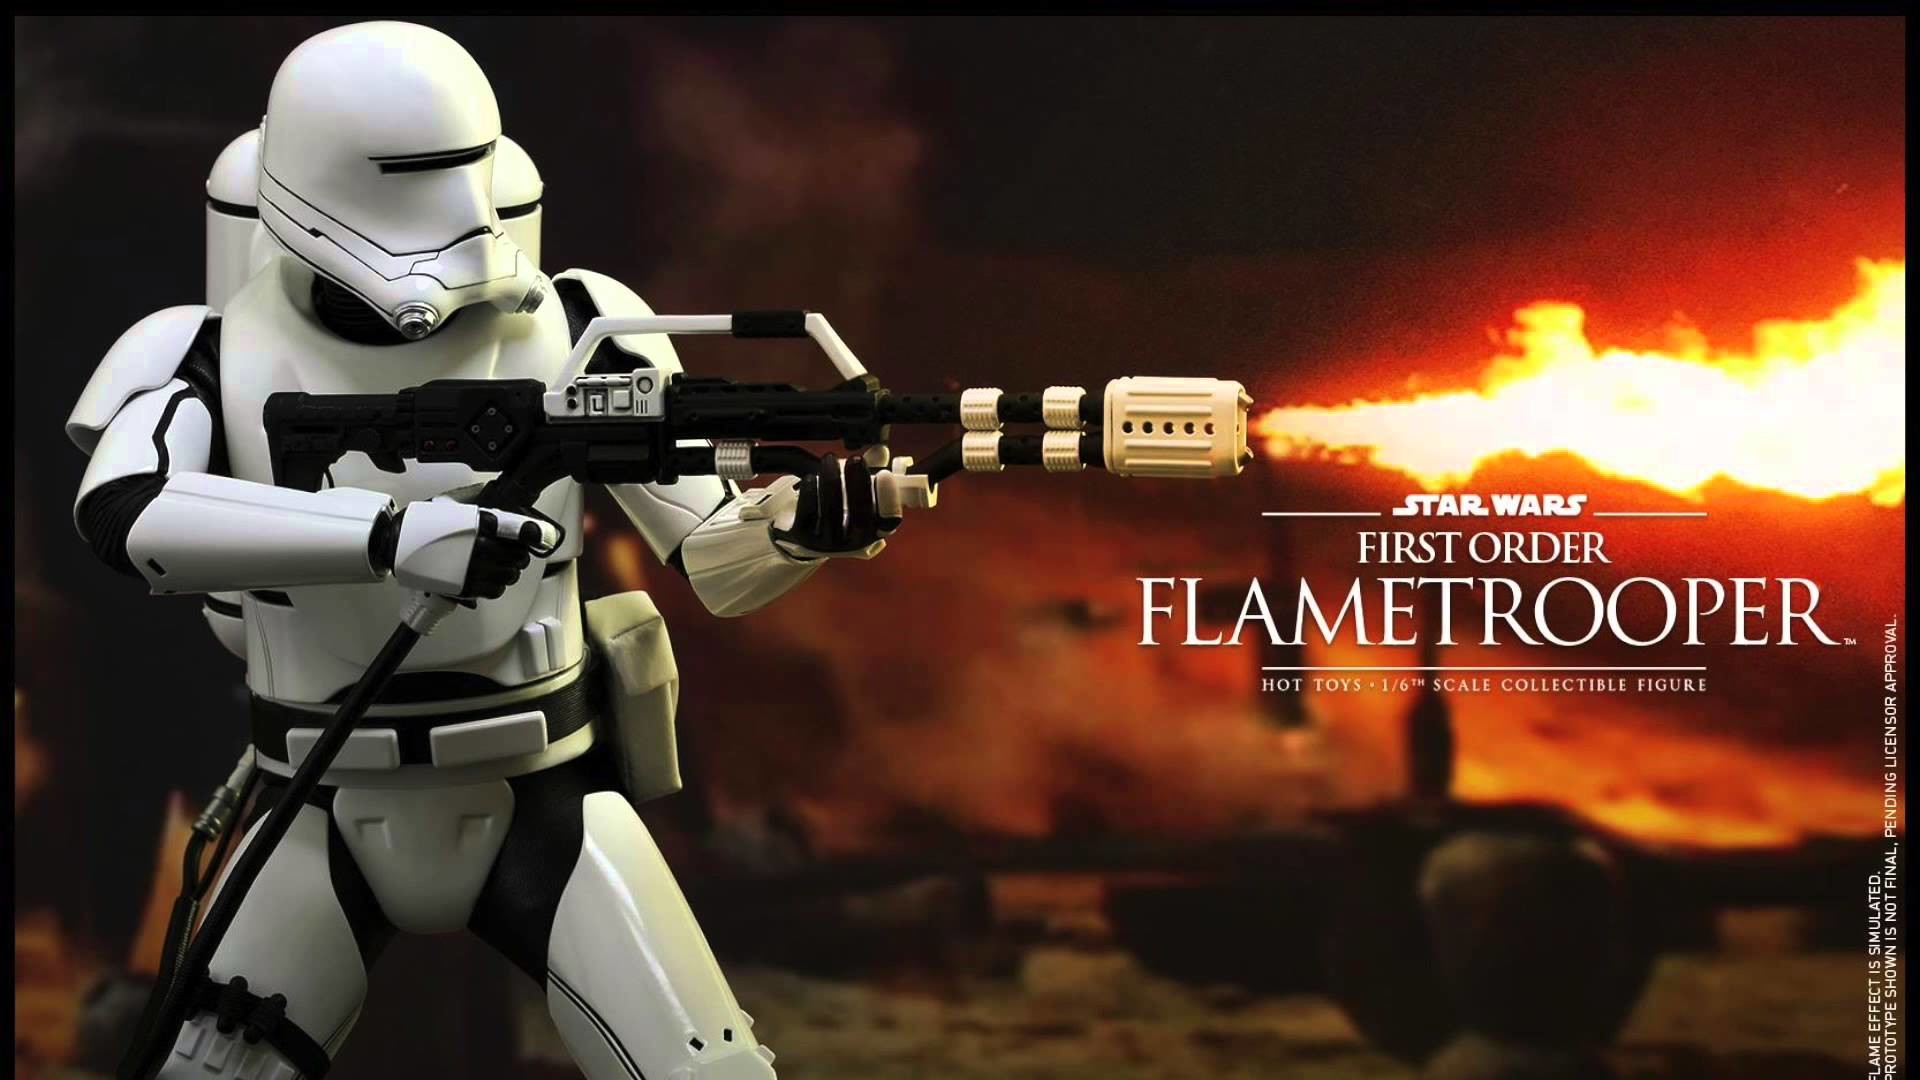 1920x1080 Star Wars The Force Awakens Hot Toys First Order Flametrooper 1/6 Scale  Movie Figure Revealed! - YouTube